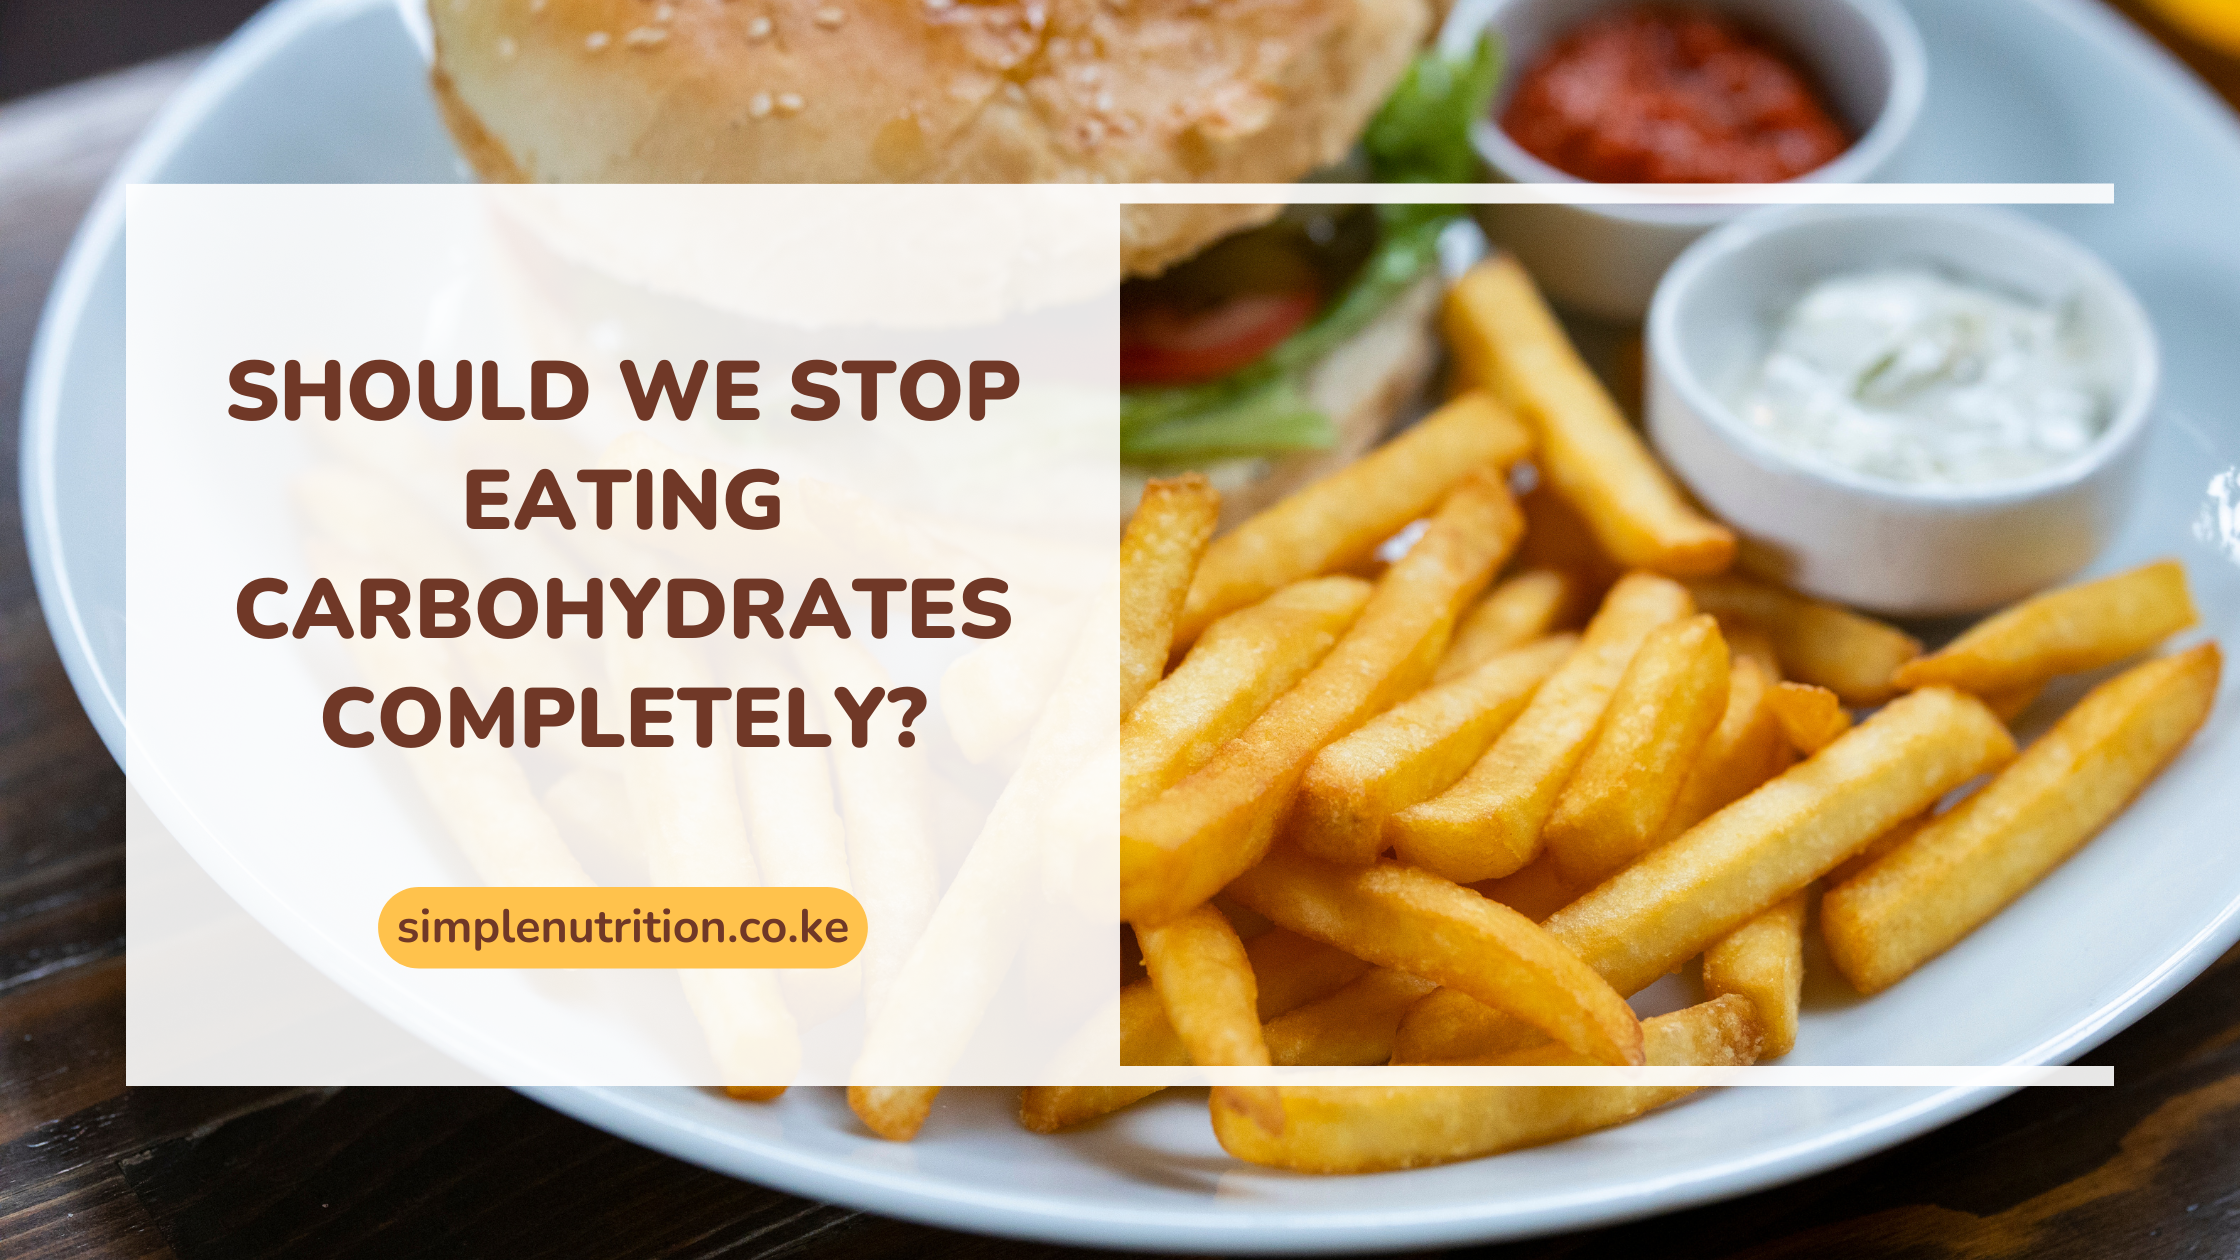 Carbohydrates: should we stop eating them completely?